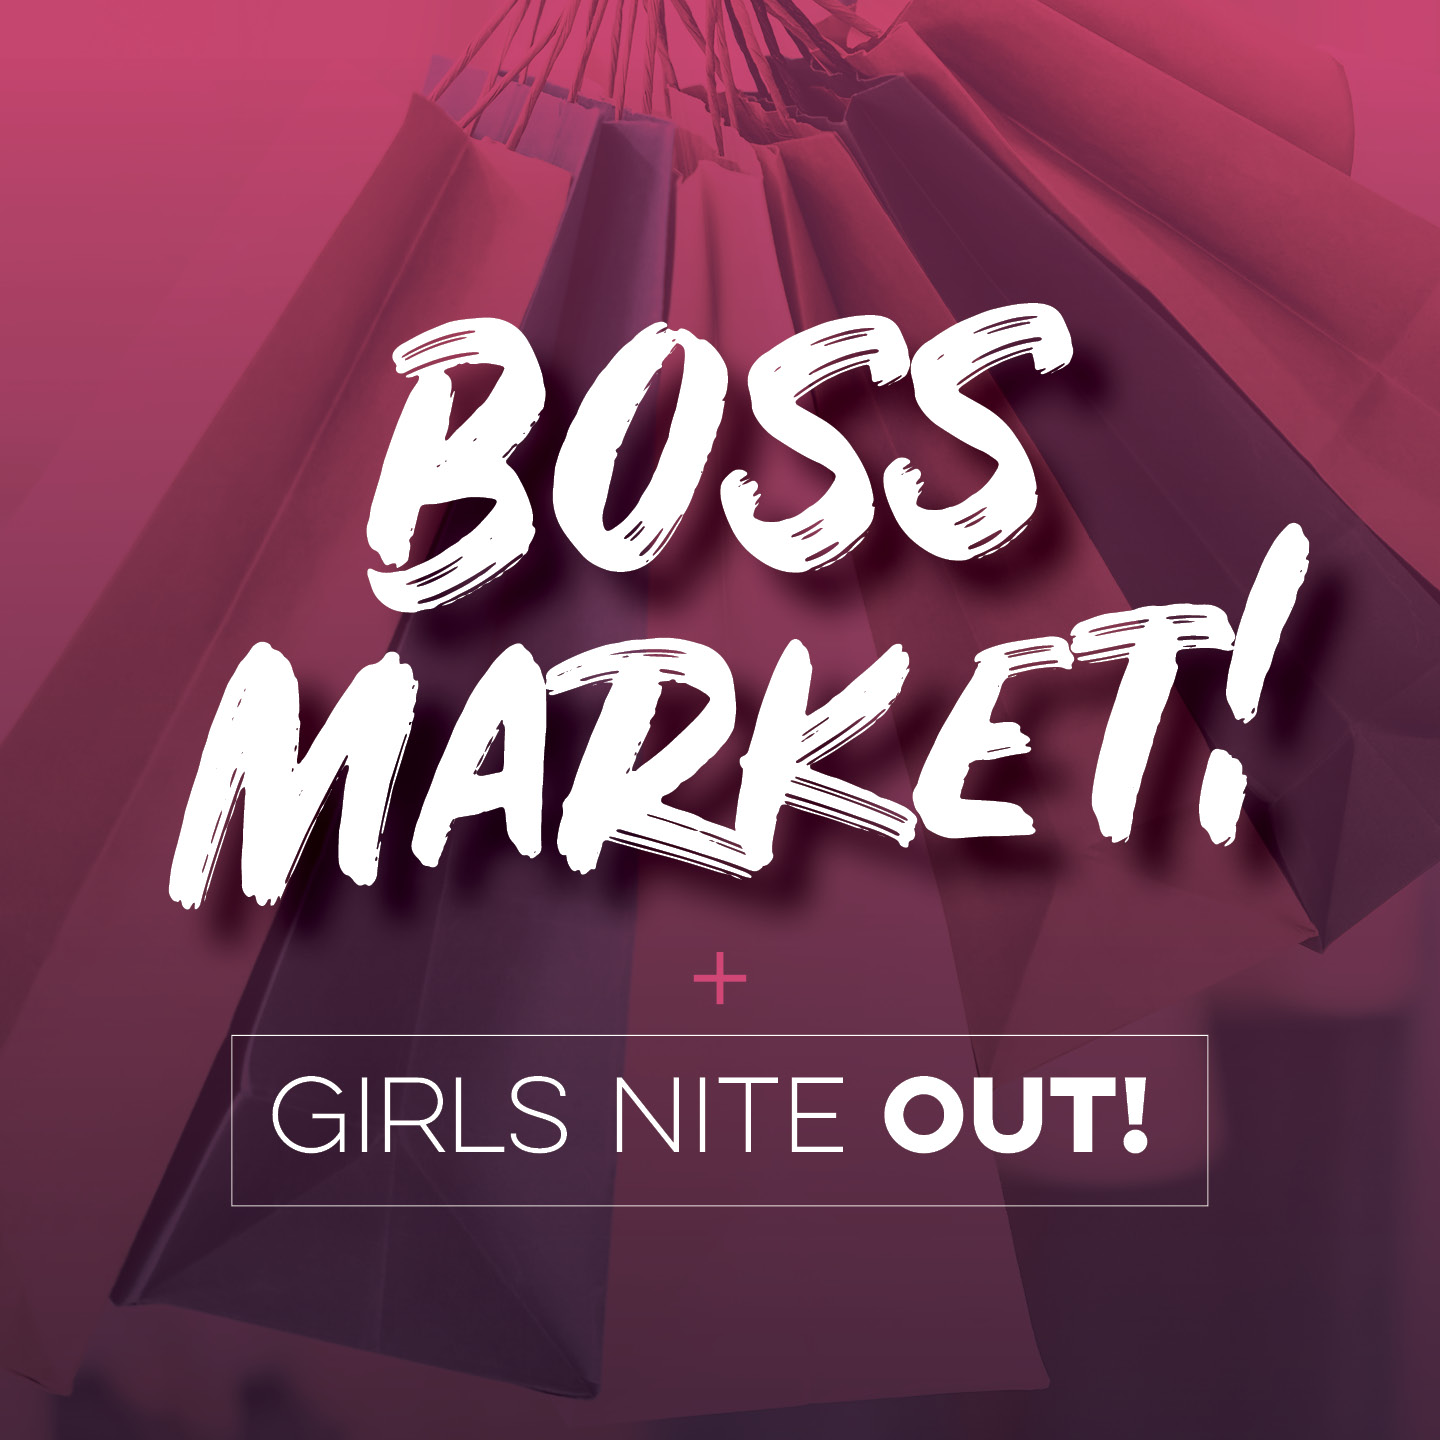 Boss market and girls nite out